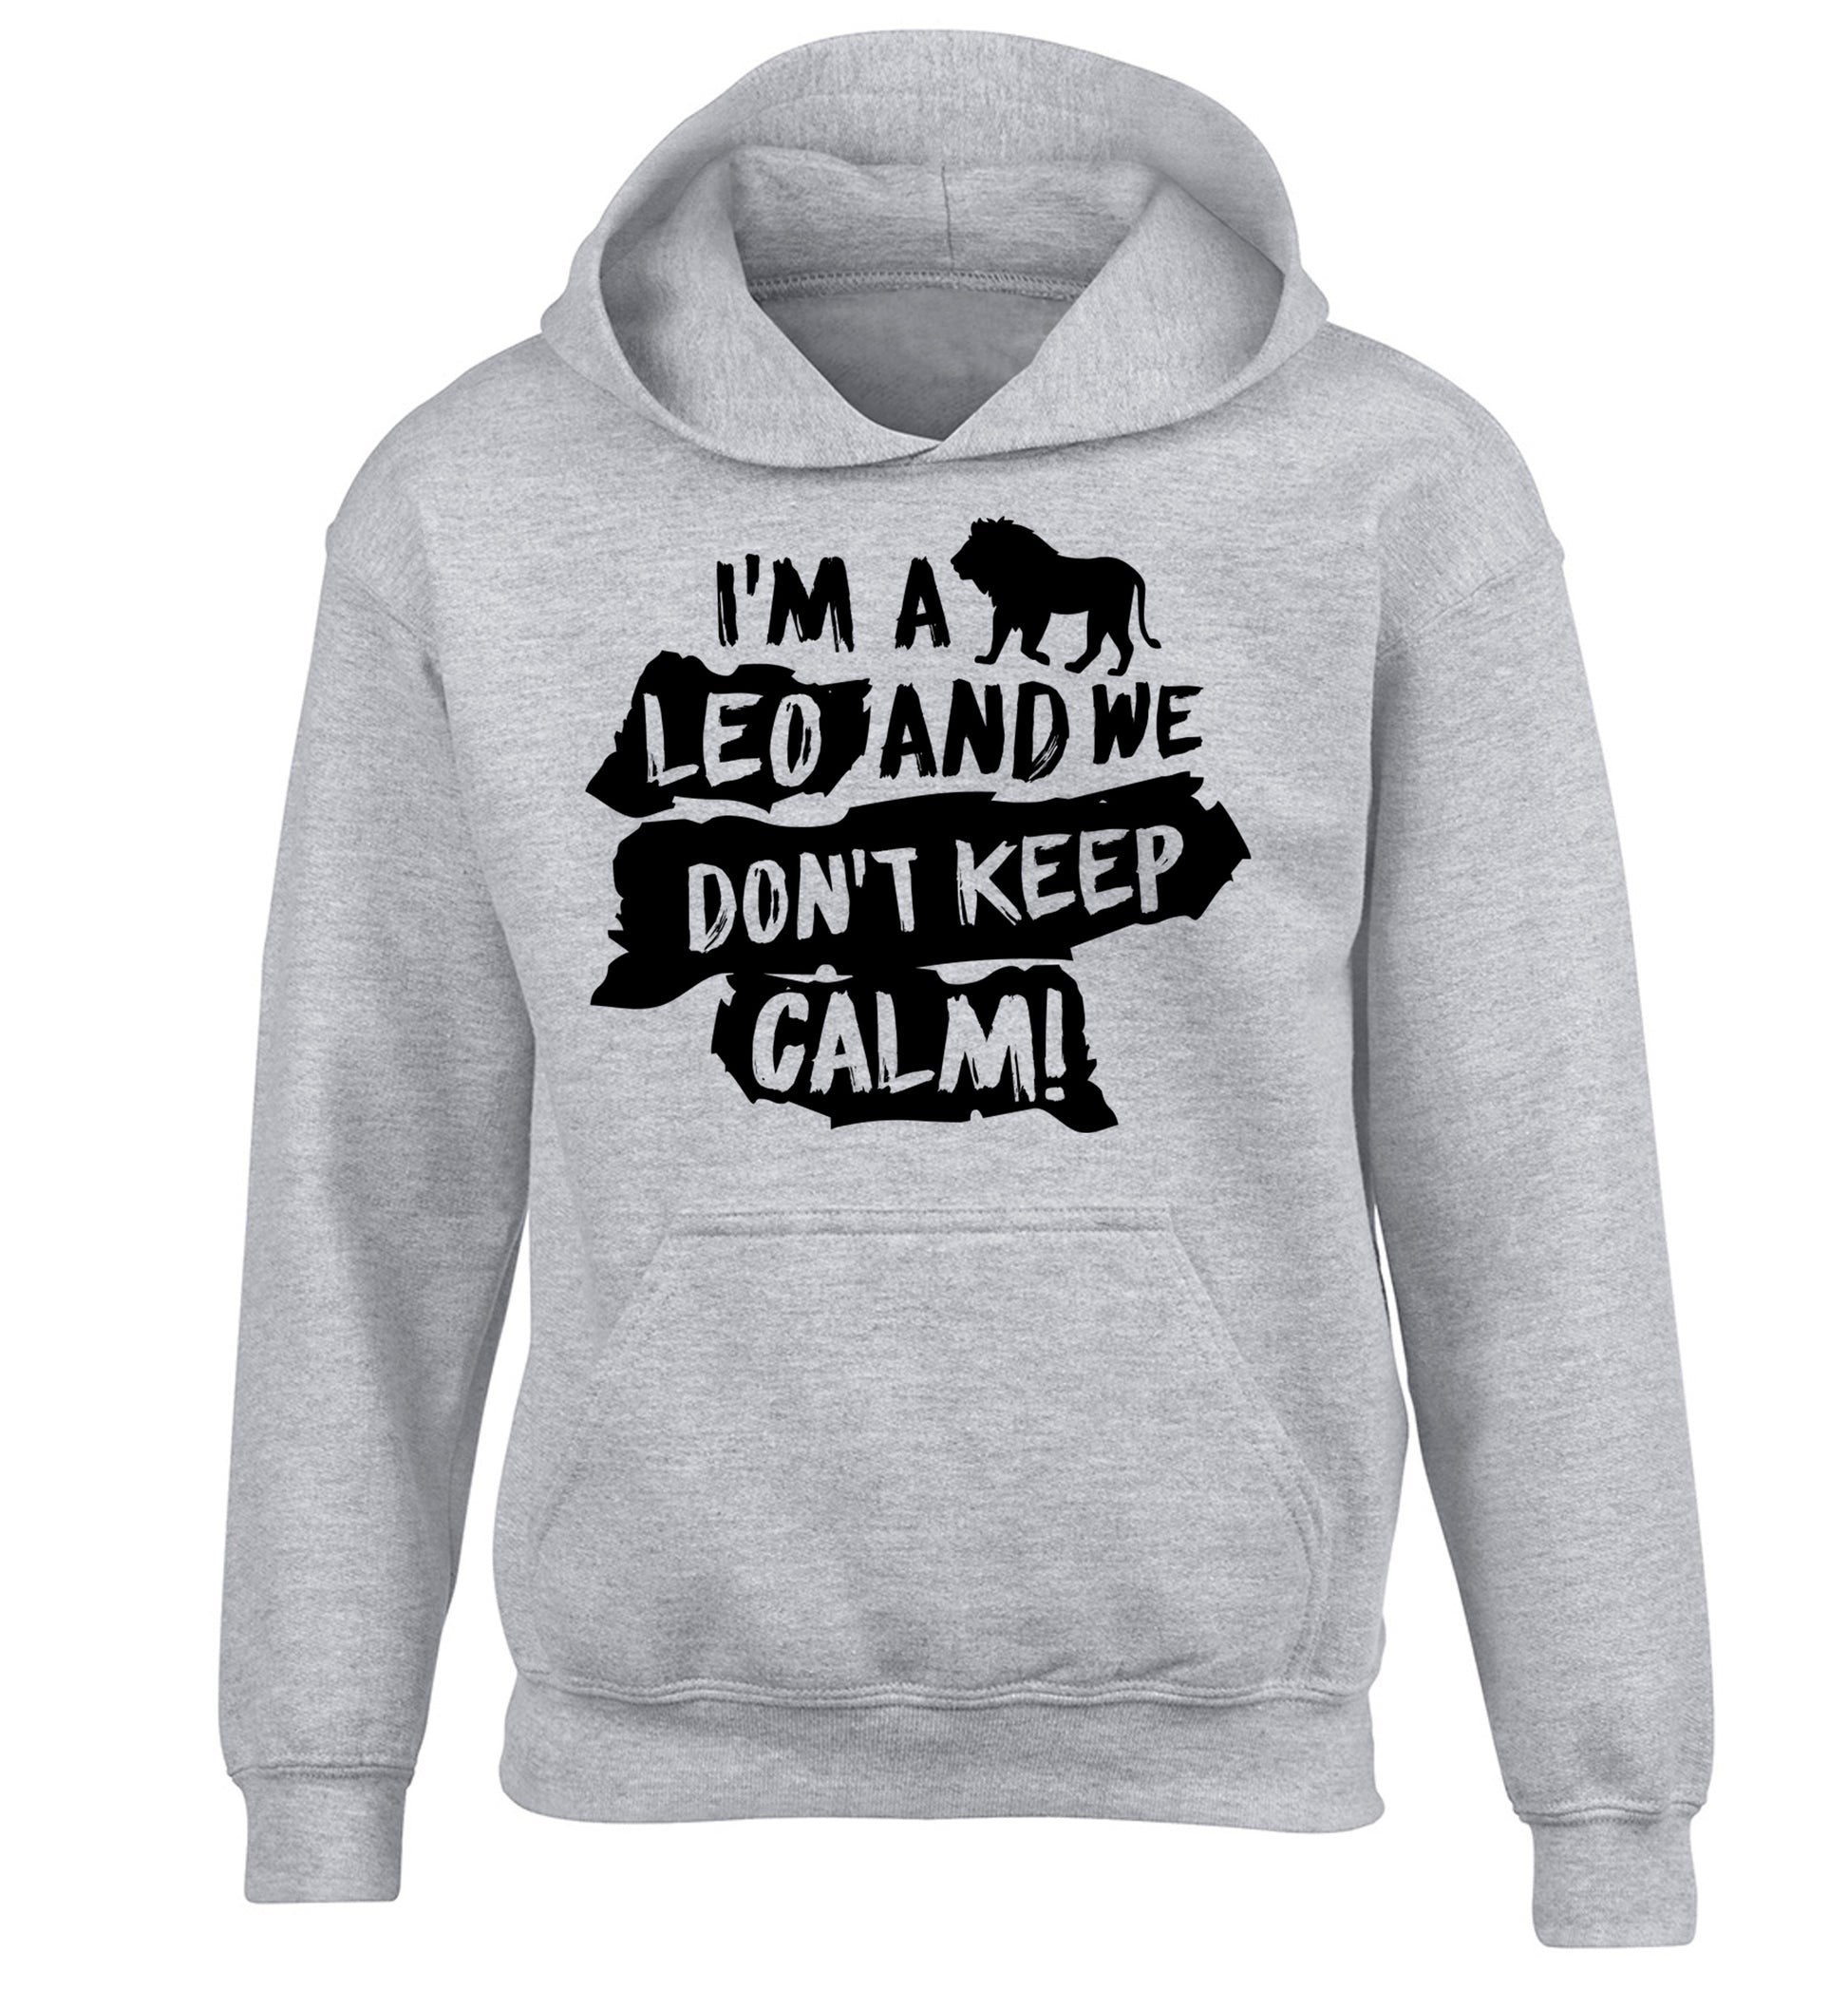 I'm a leo and we don't keep calm! children's grey hoodie 12-13 Years